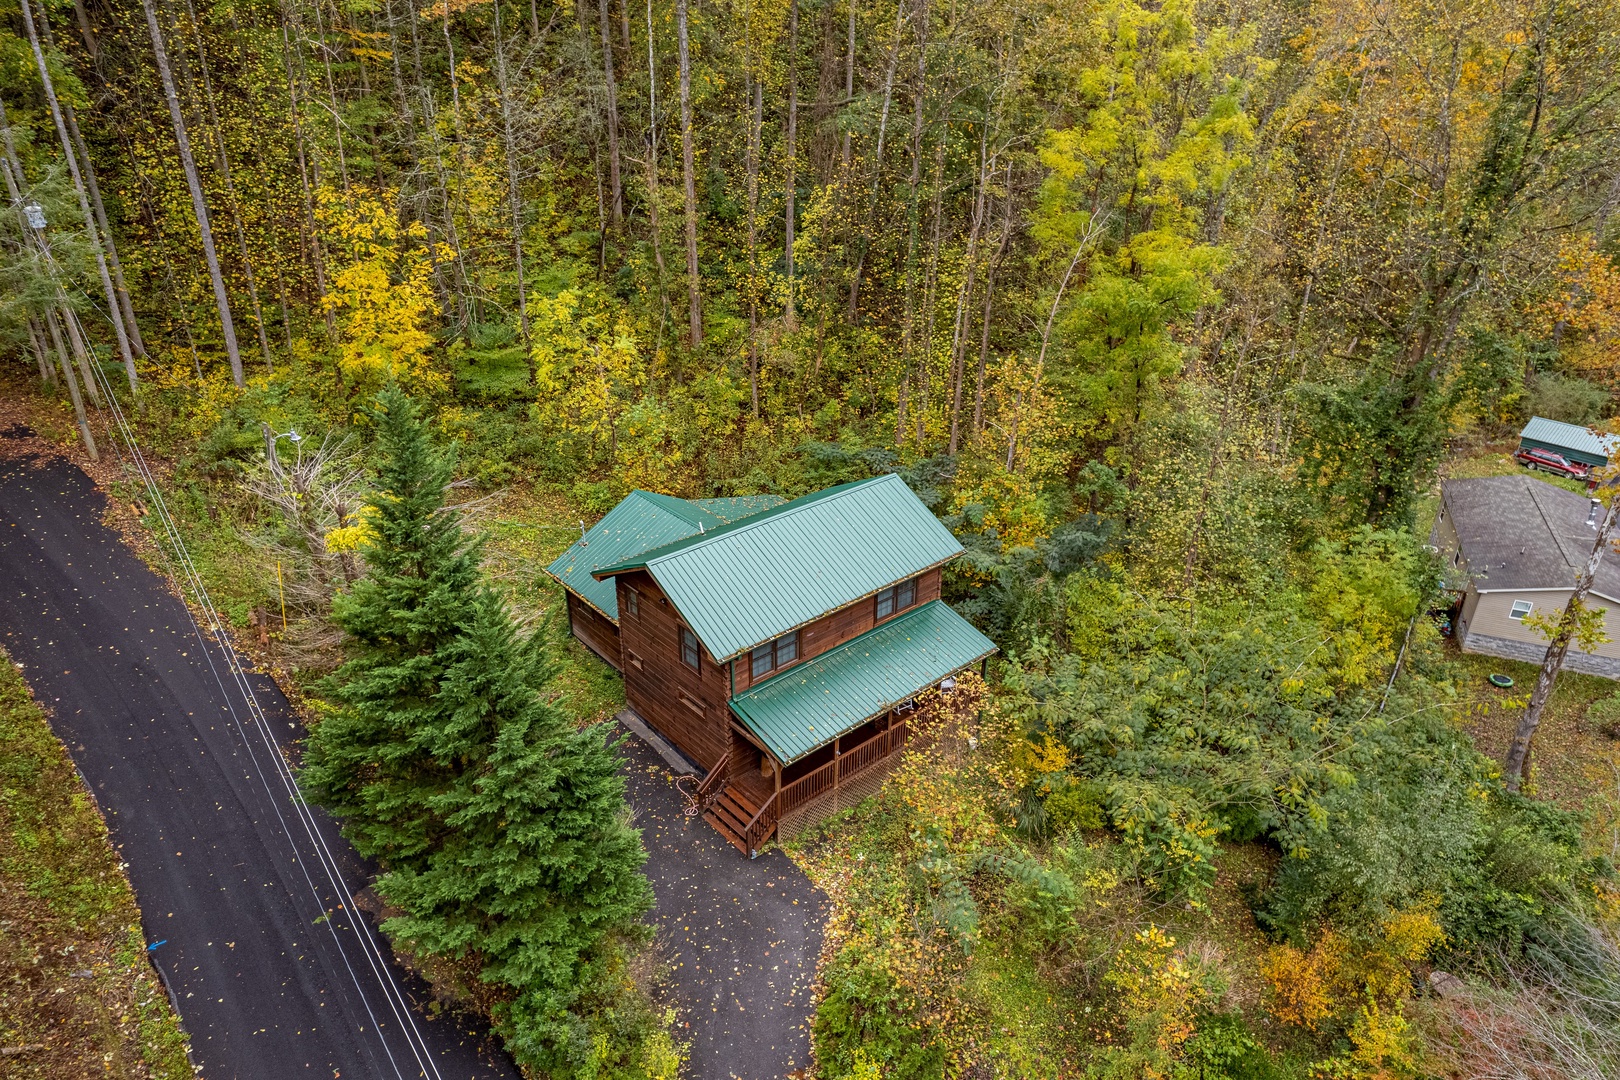 Aerial View of Tammy's Place At Baskins Creek, a 2 bedroom cabin rental located in gatlinburg